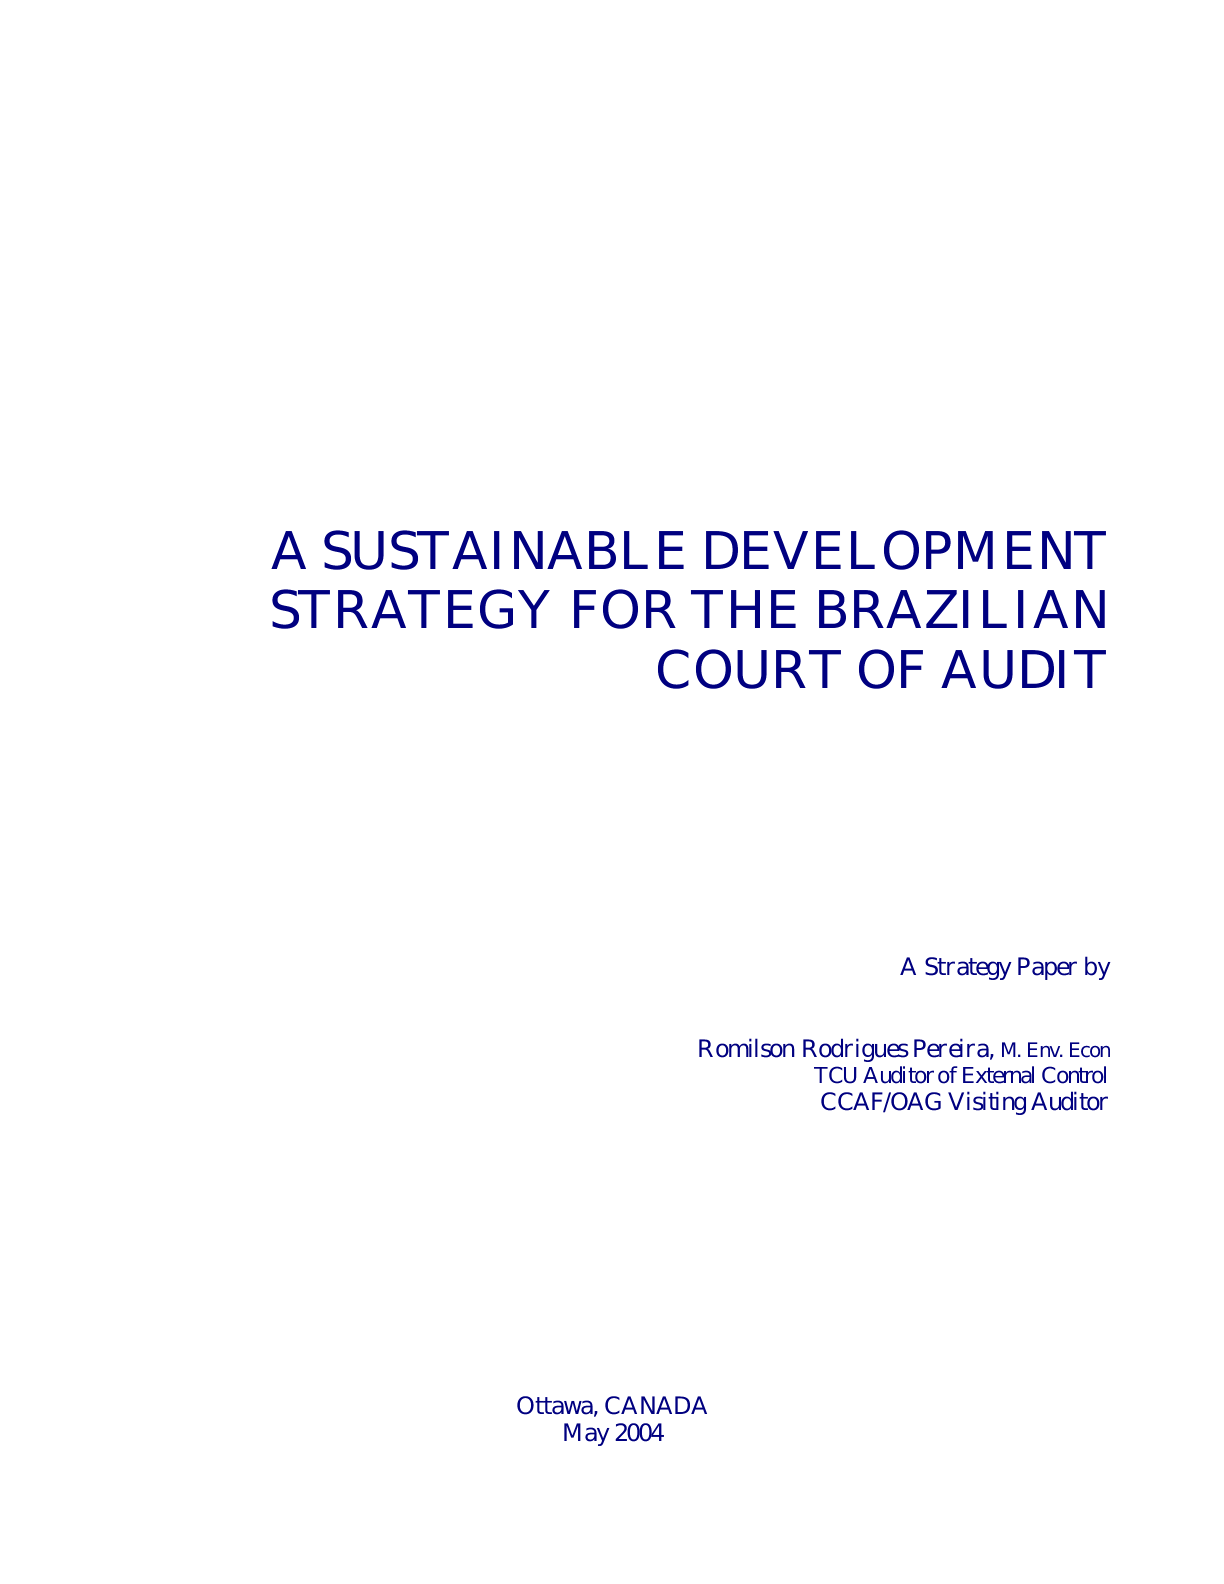 sustainable development strategy for the brazilian court.png